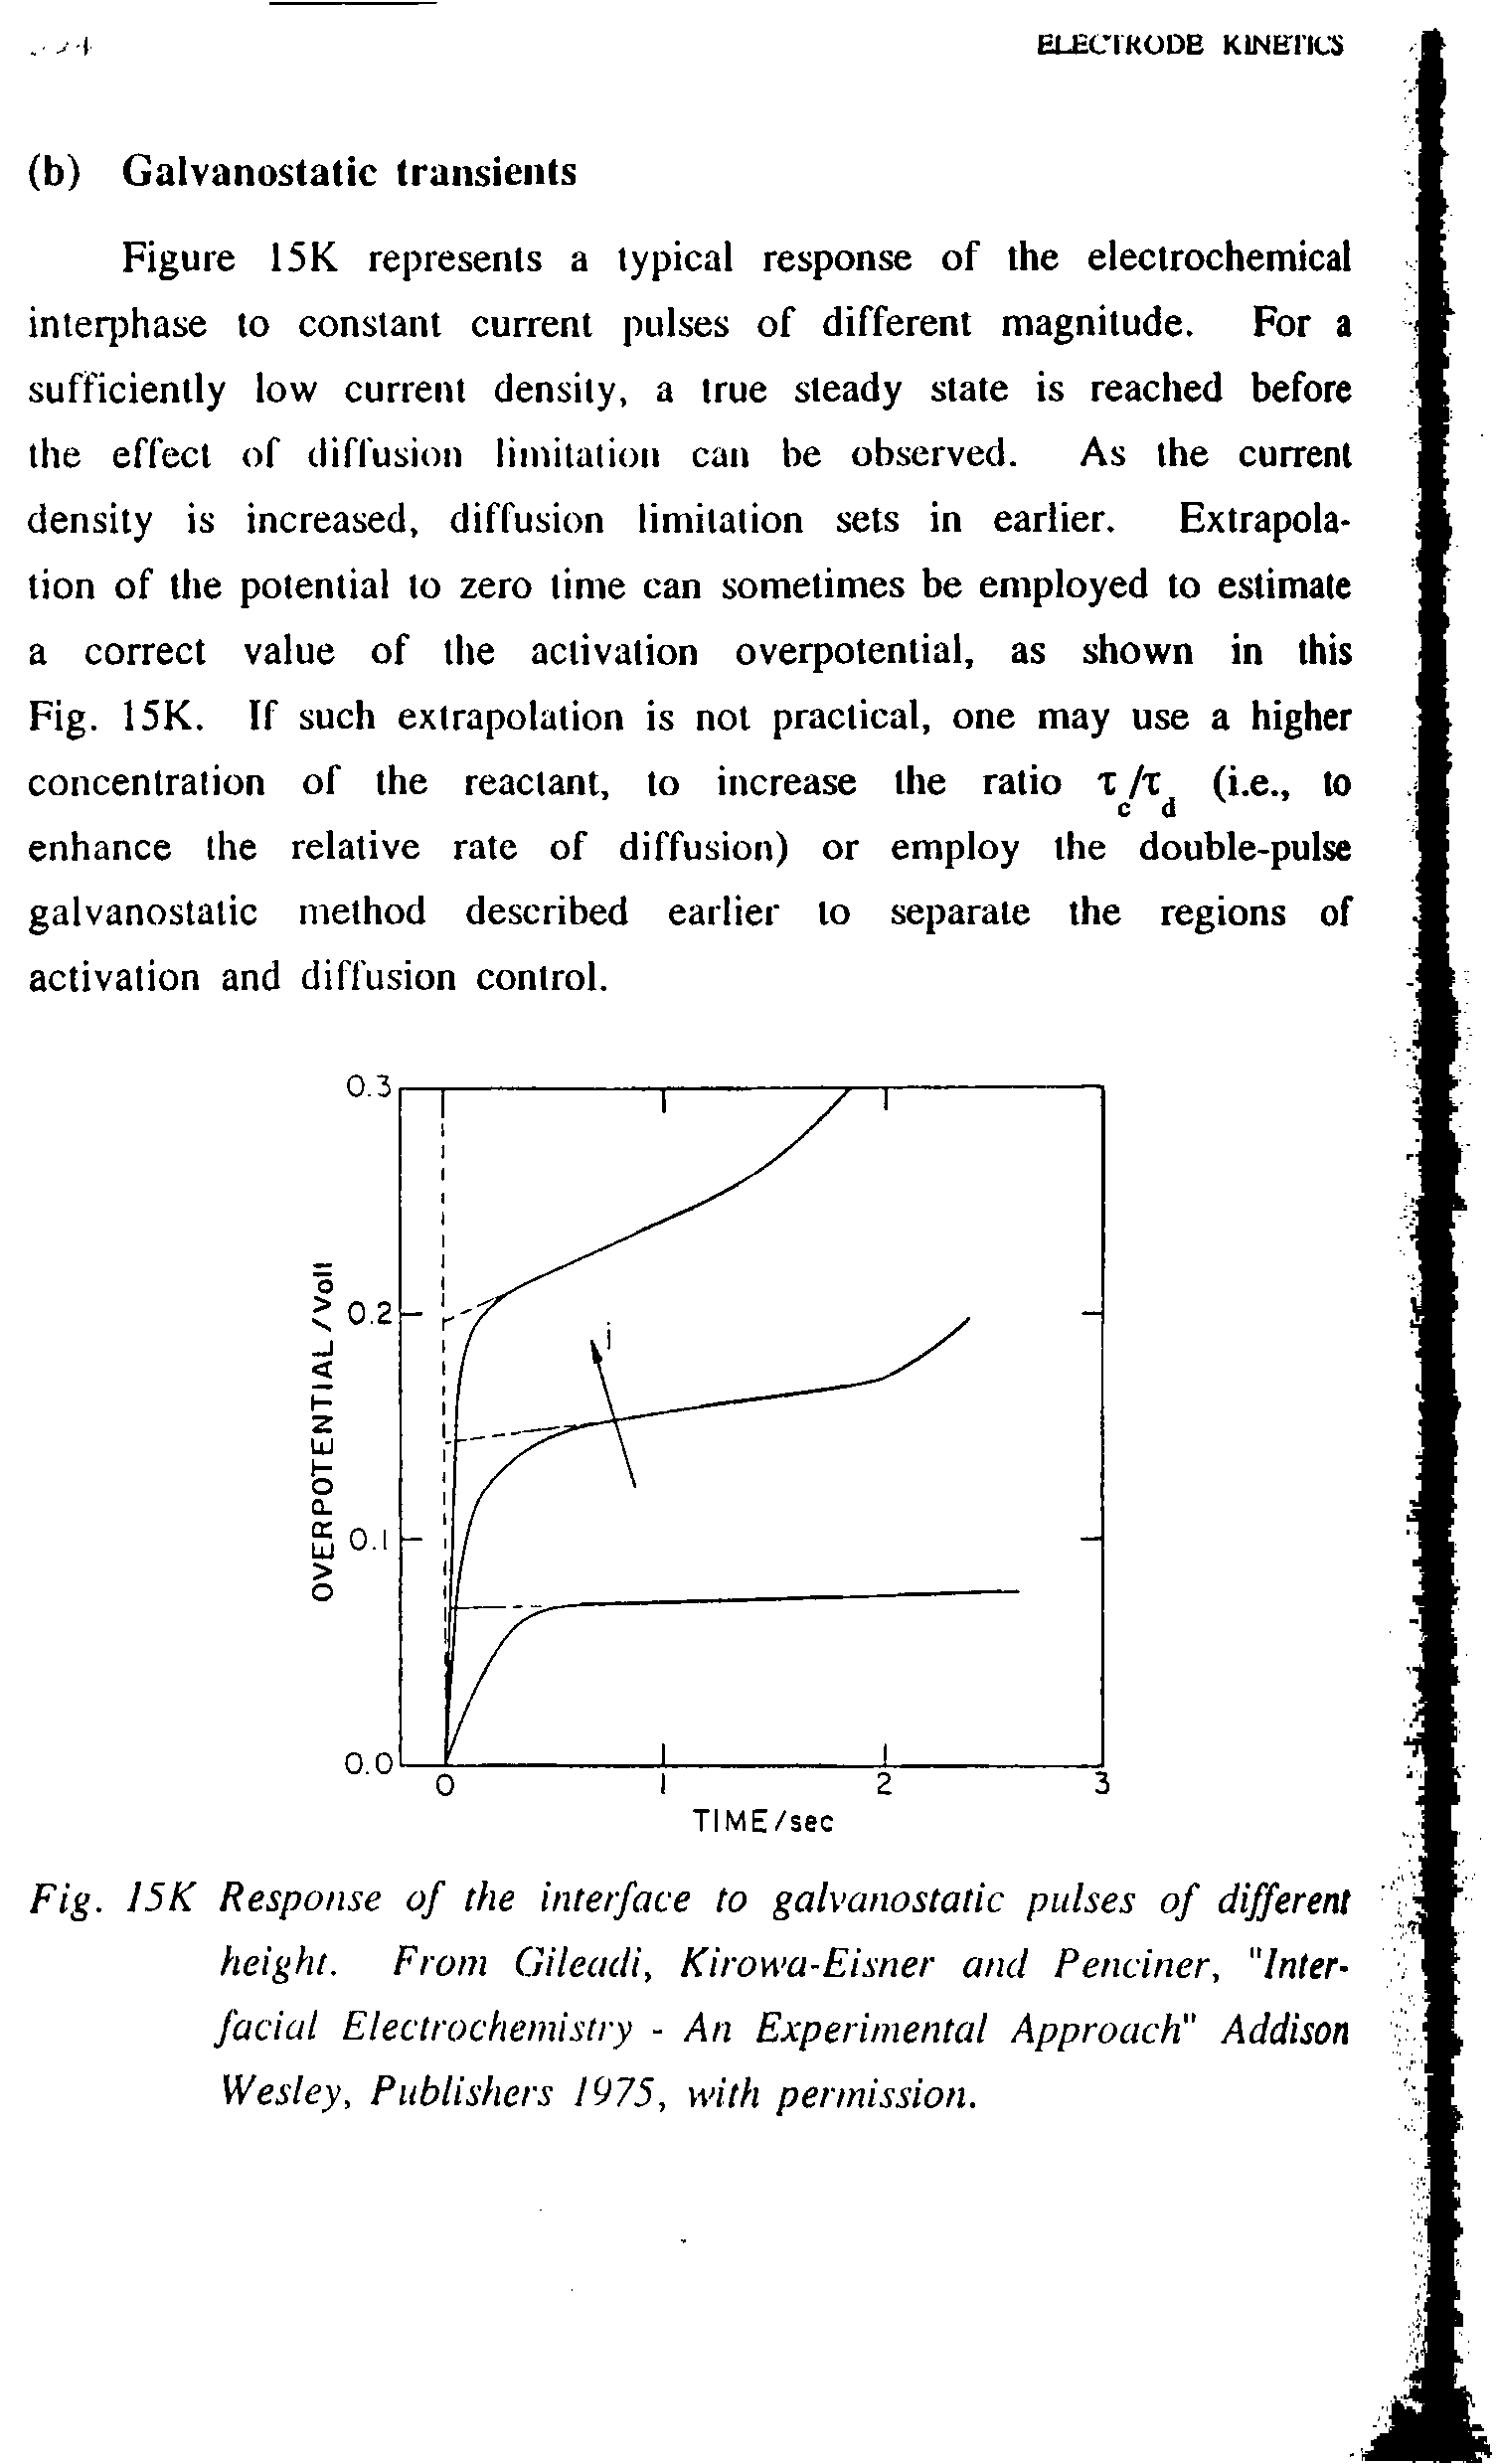 Fig. I5K Response of the interface to galvanostatic pulses of different height. From Gileadi, Kirowa-Eisner and Penciner, "Interfacial Electrochemistry - An Experimental Approach" Addison Wesley, Publishers 1975, with permission.